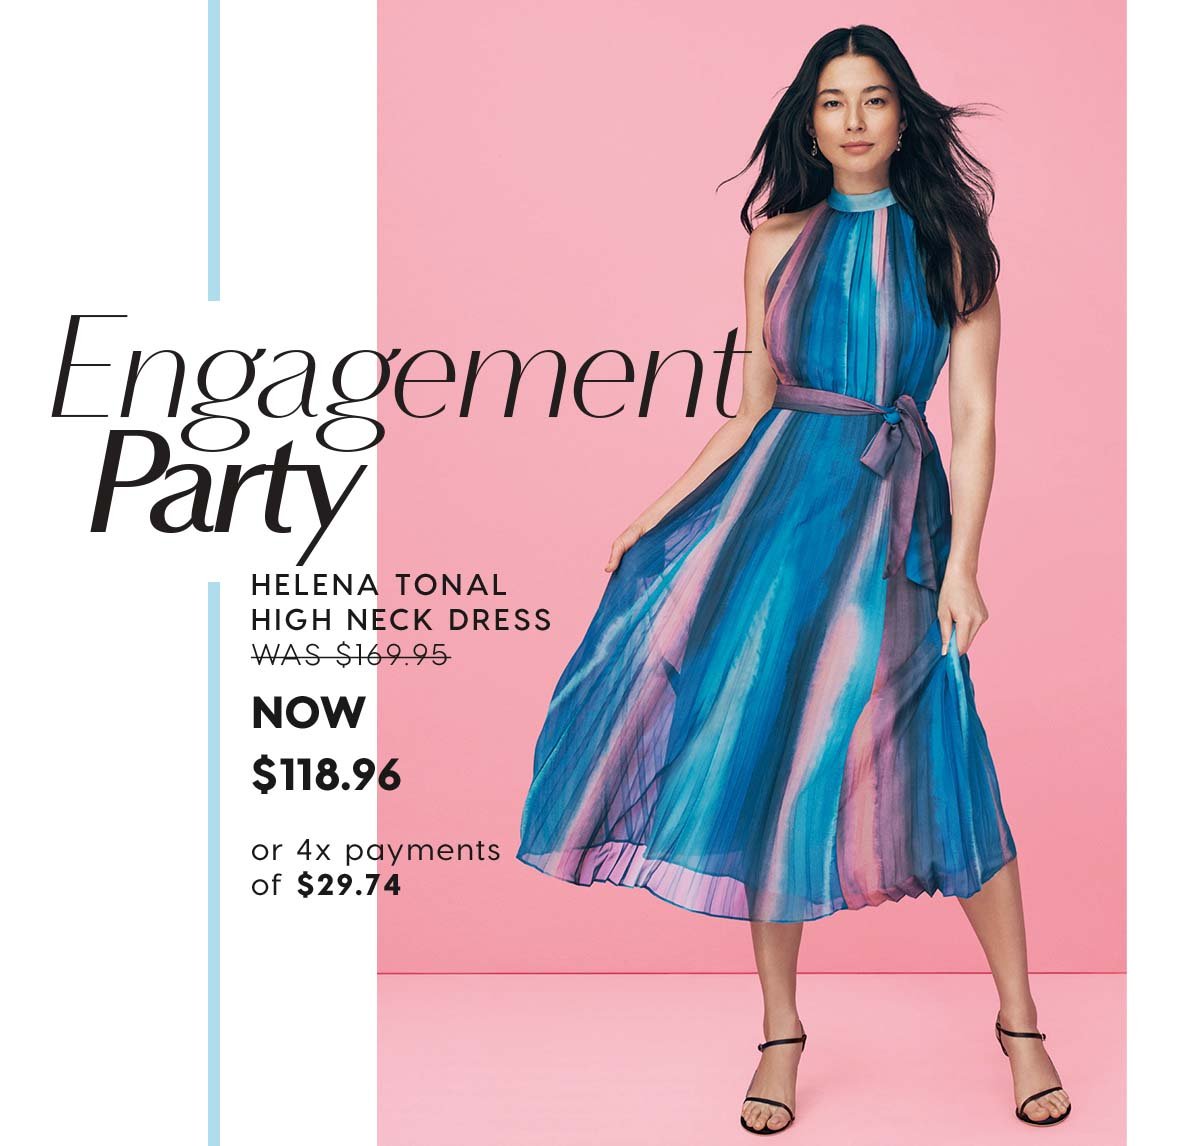 Engagement Party. Helena Tonal High Neck Dress WAS $169.95 NOW  $118.96